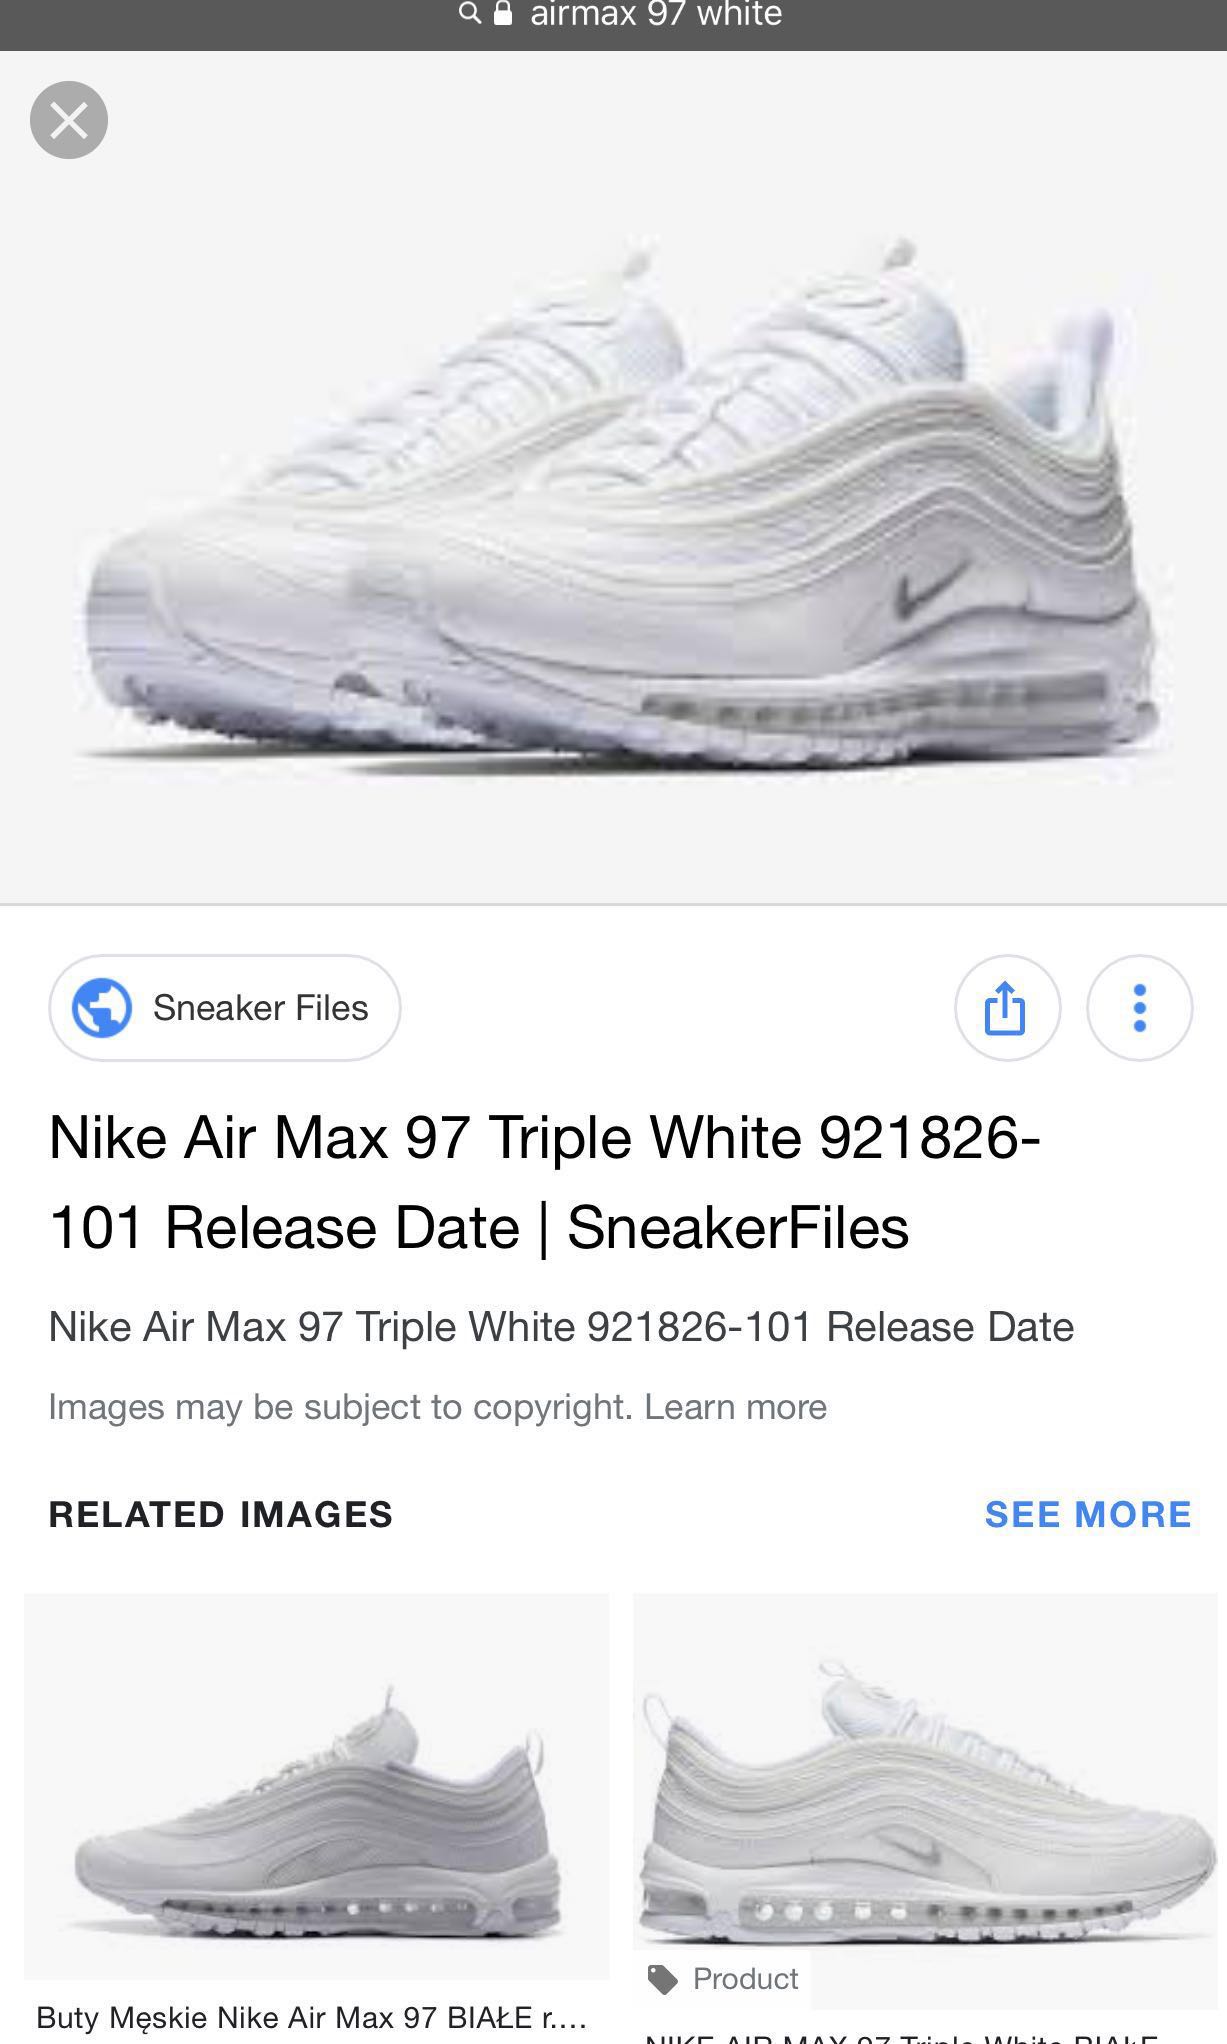 NIKE AIR MAX 97 WHITE REDUCED TO $75 